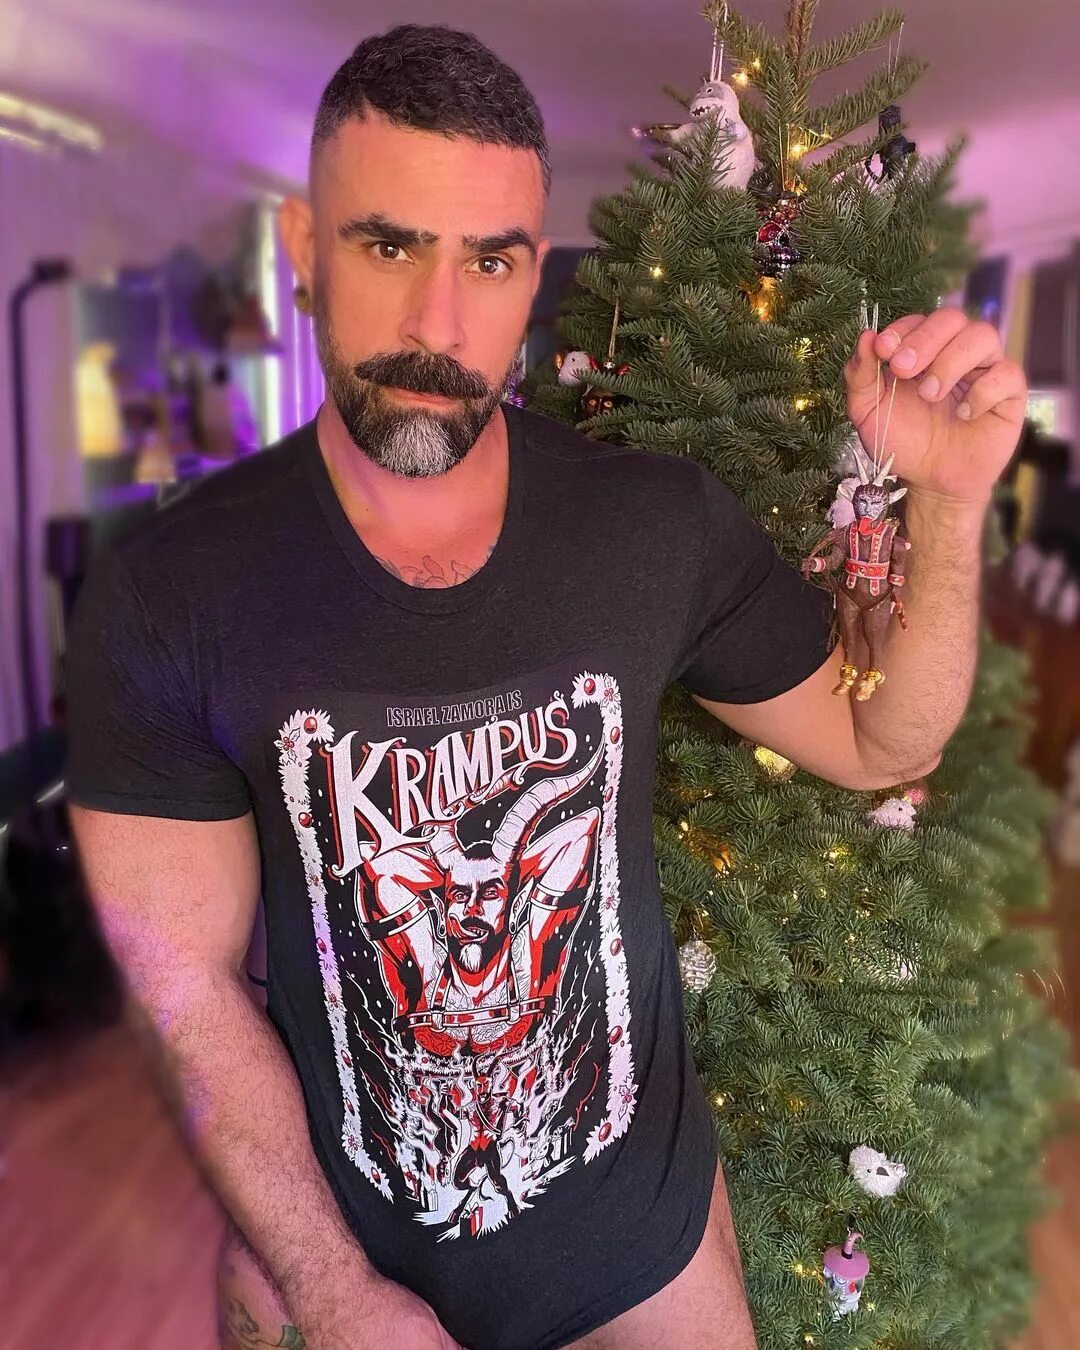 Israel Zamora auf Instagram: "Have you been on the naughty list? 